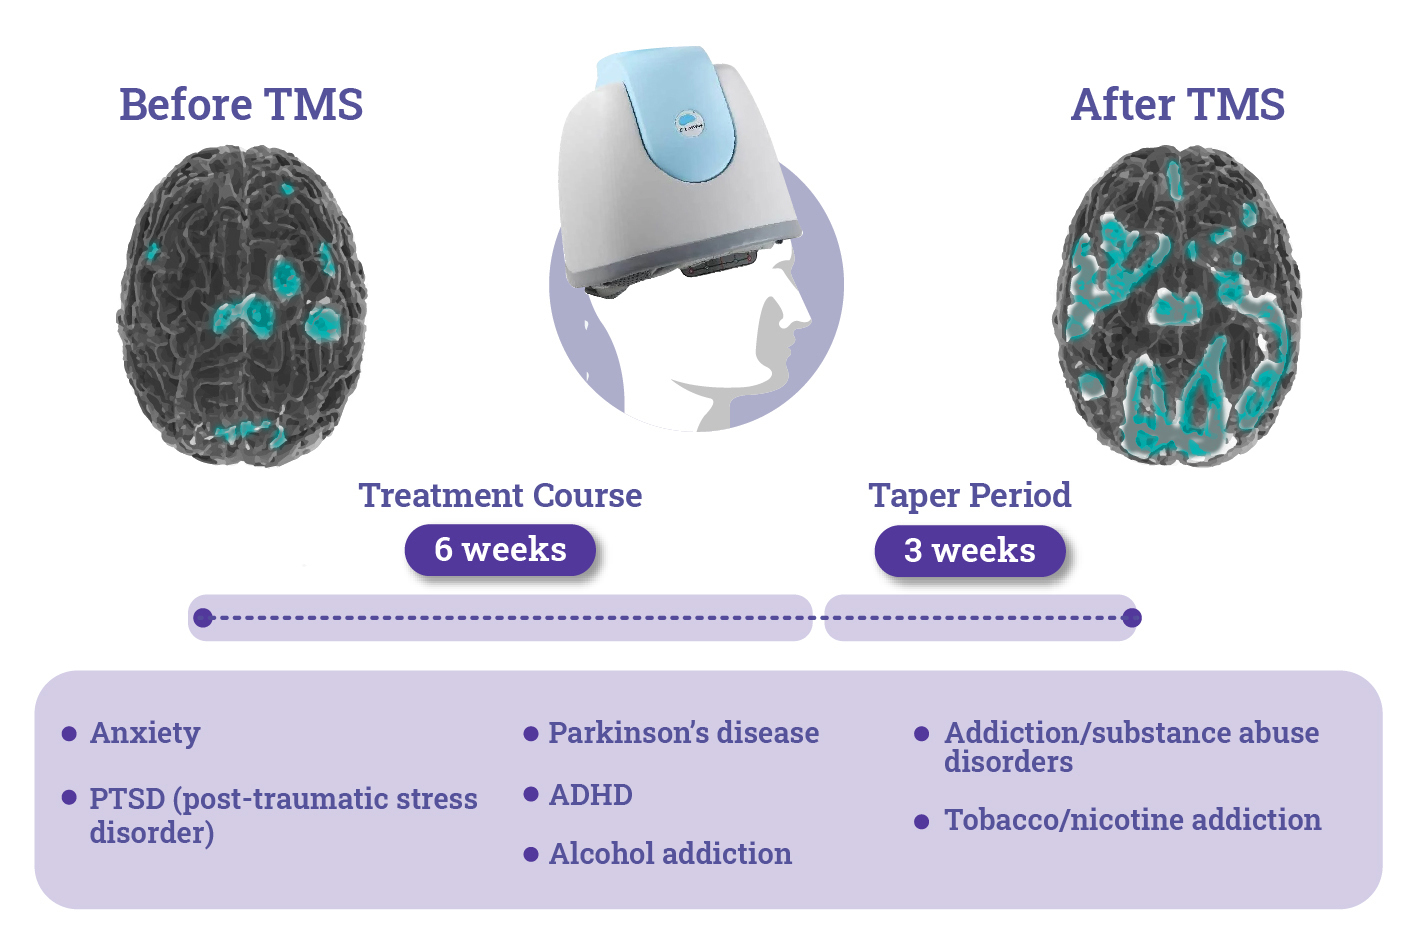 Tms therapy process